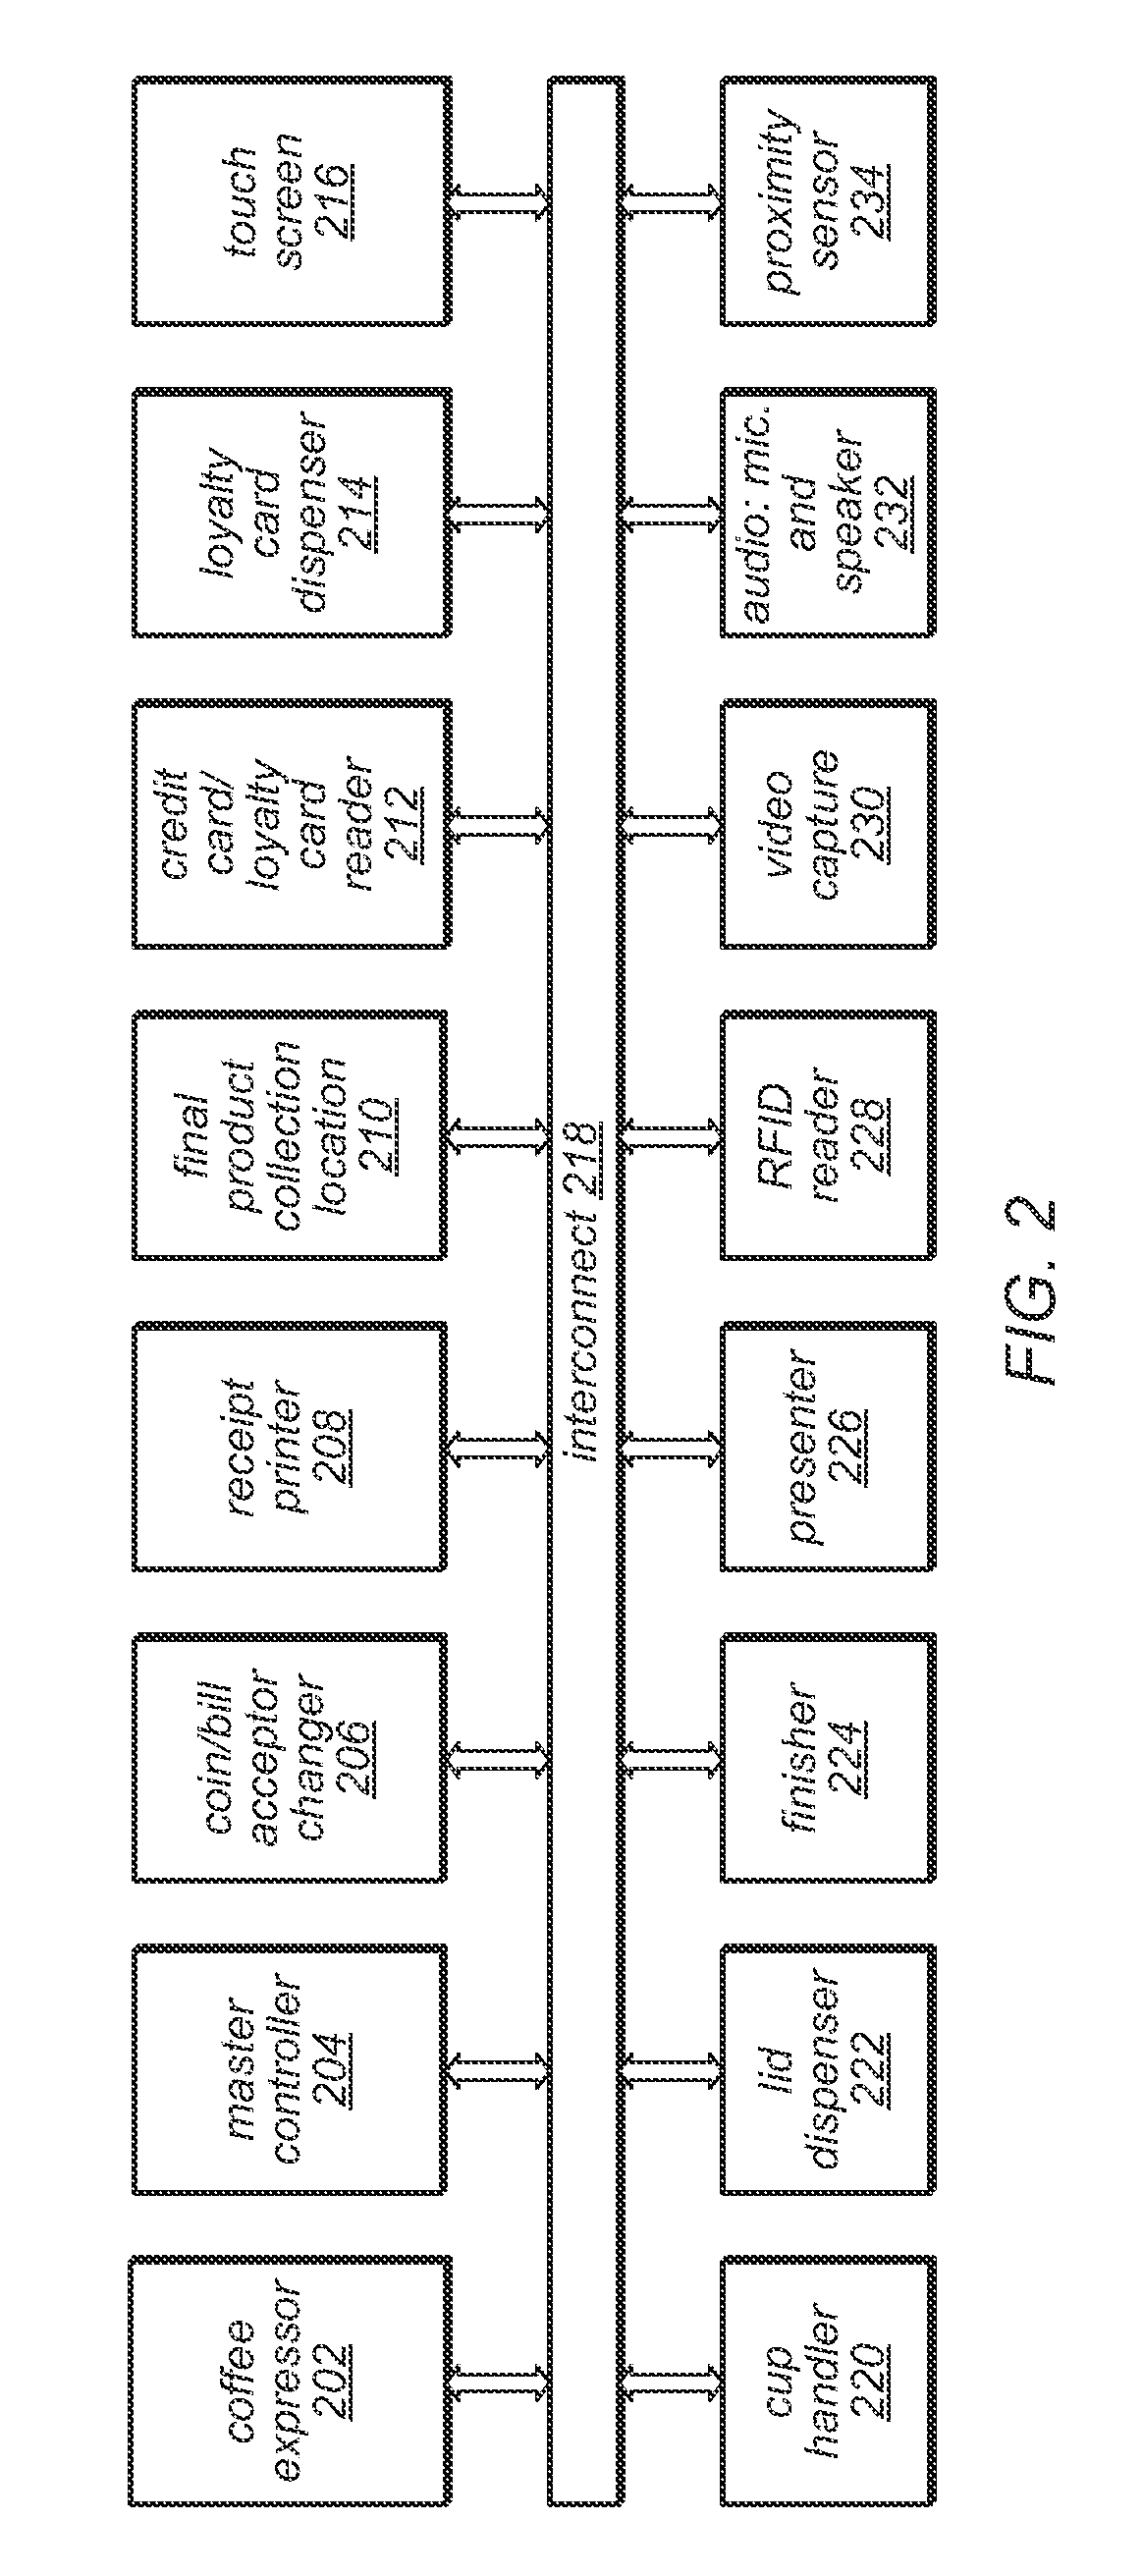 Apparatus and Method for Brewed and Espresso Drink Generation